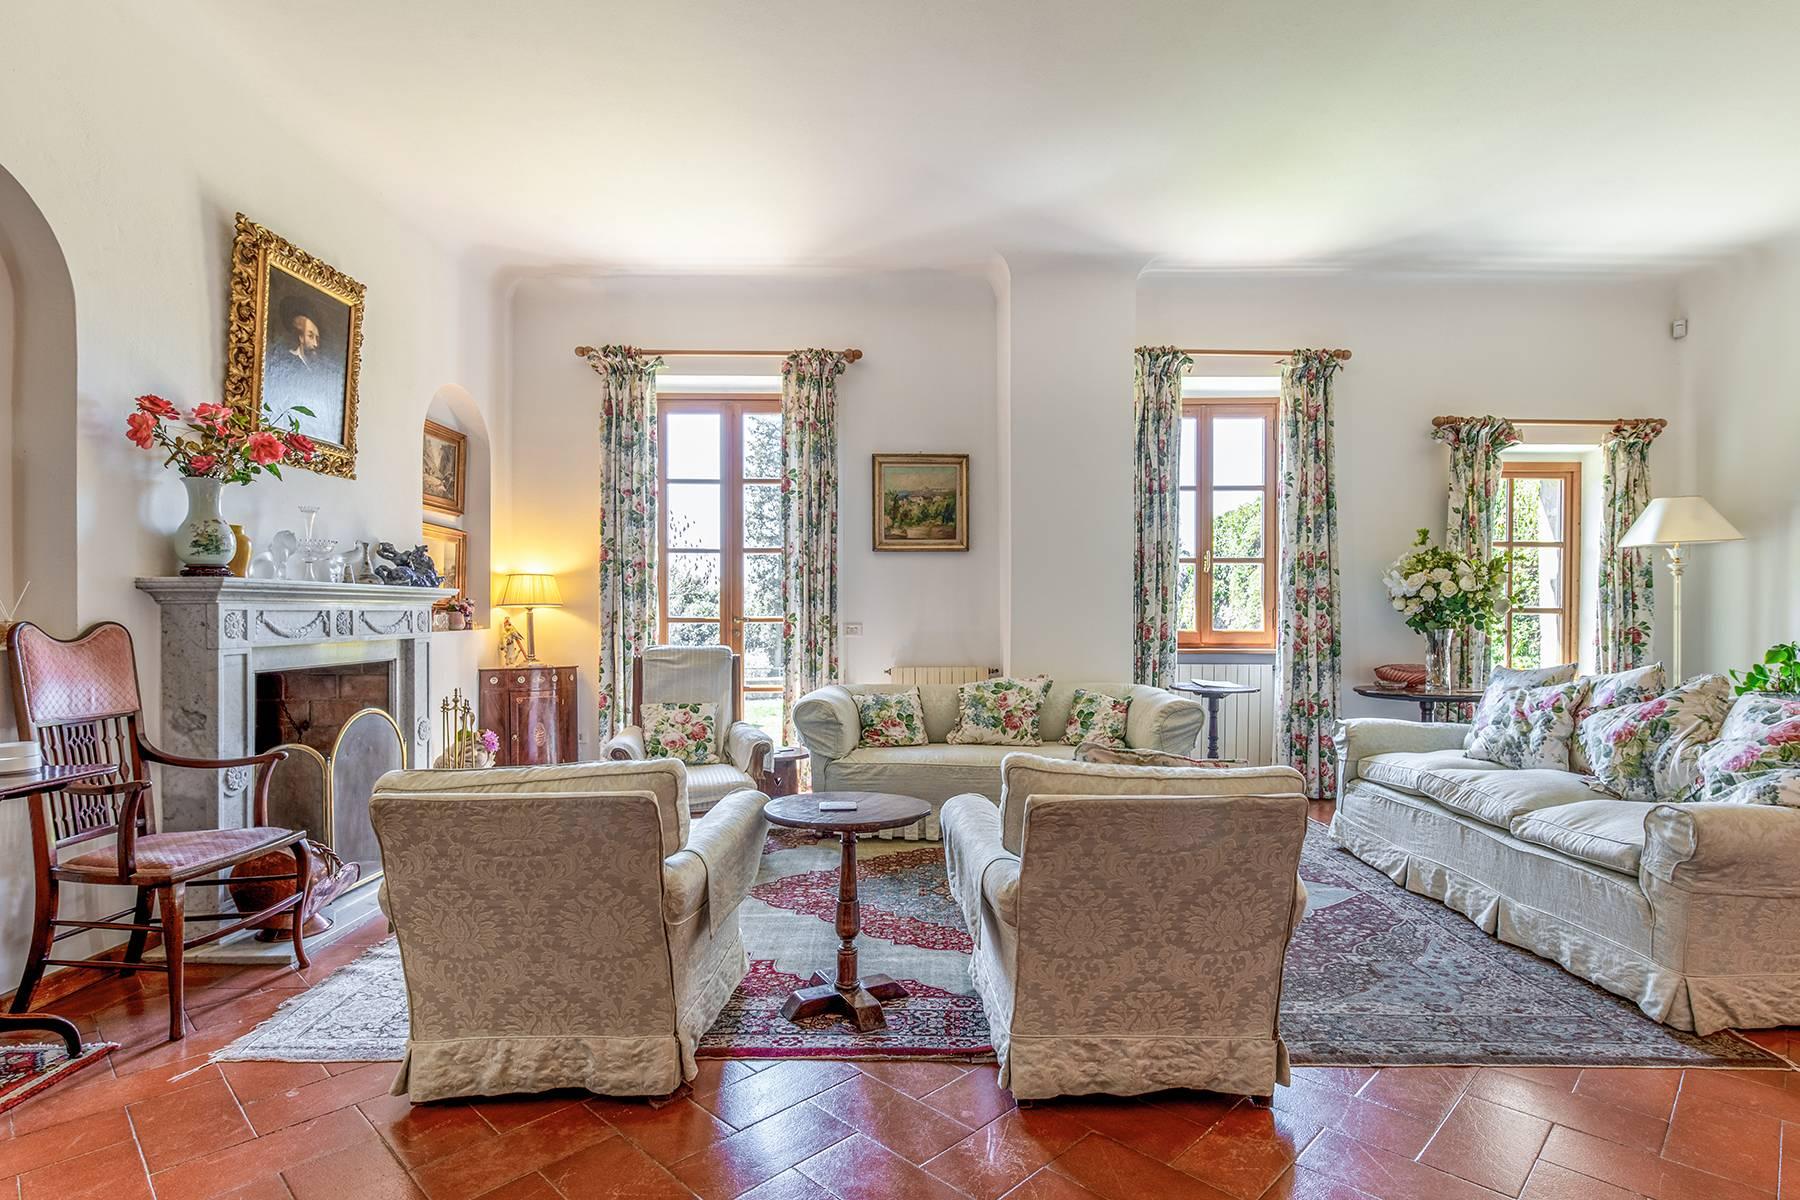 Exquisite villa with a stunning view in Fiesole - 5